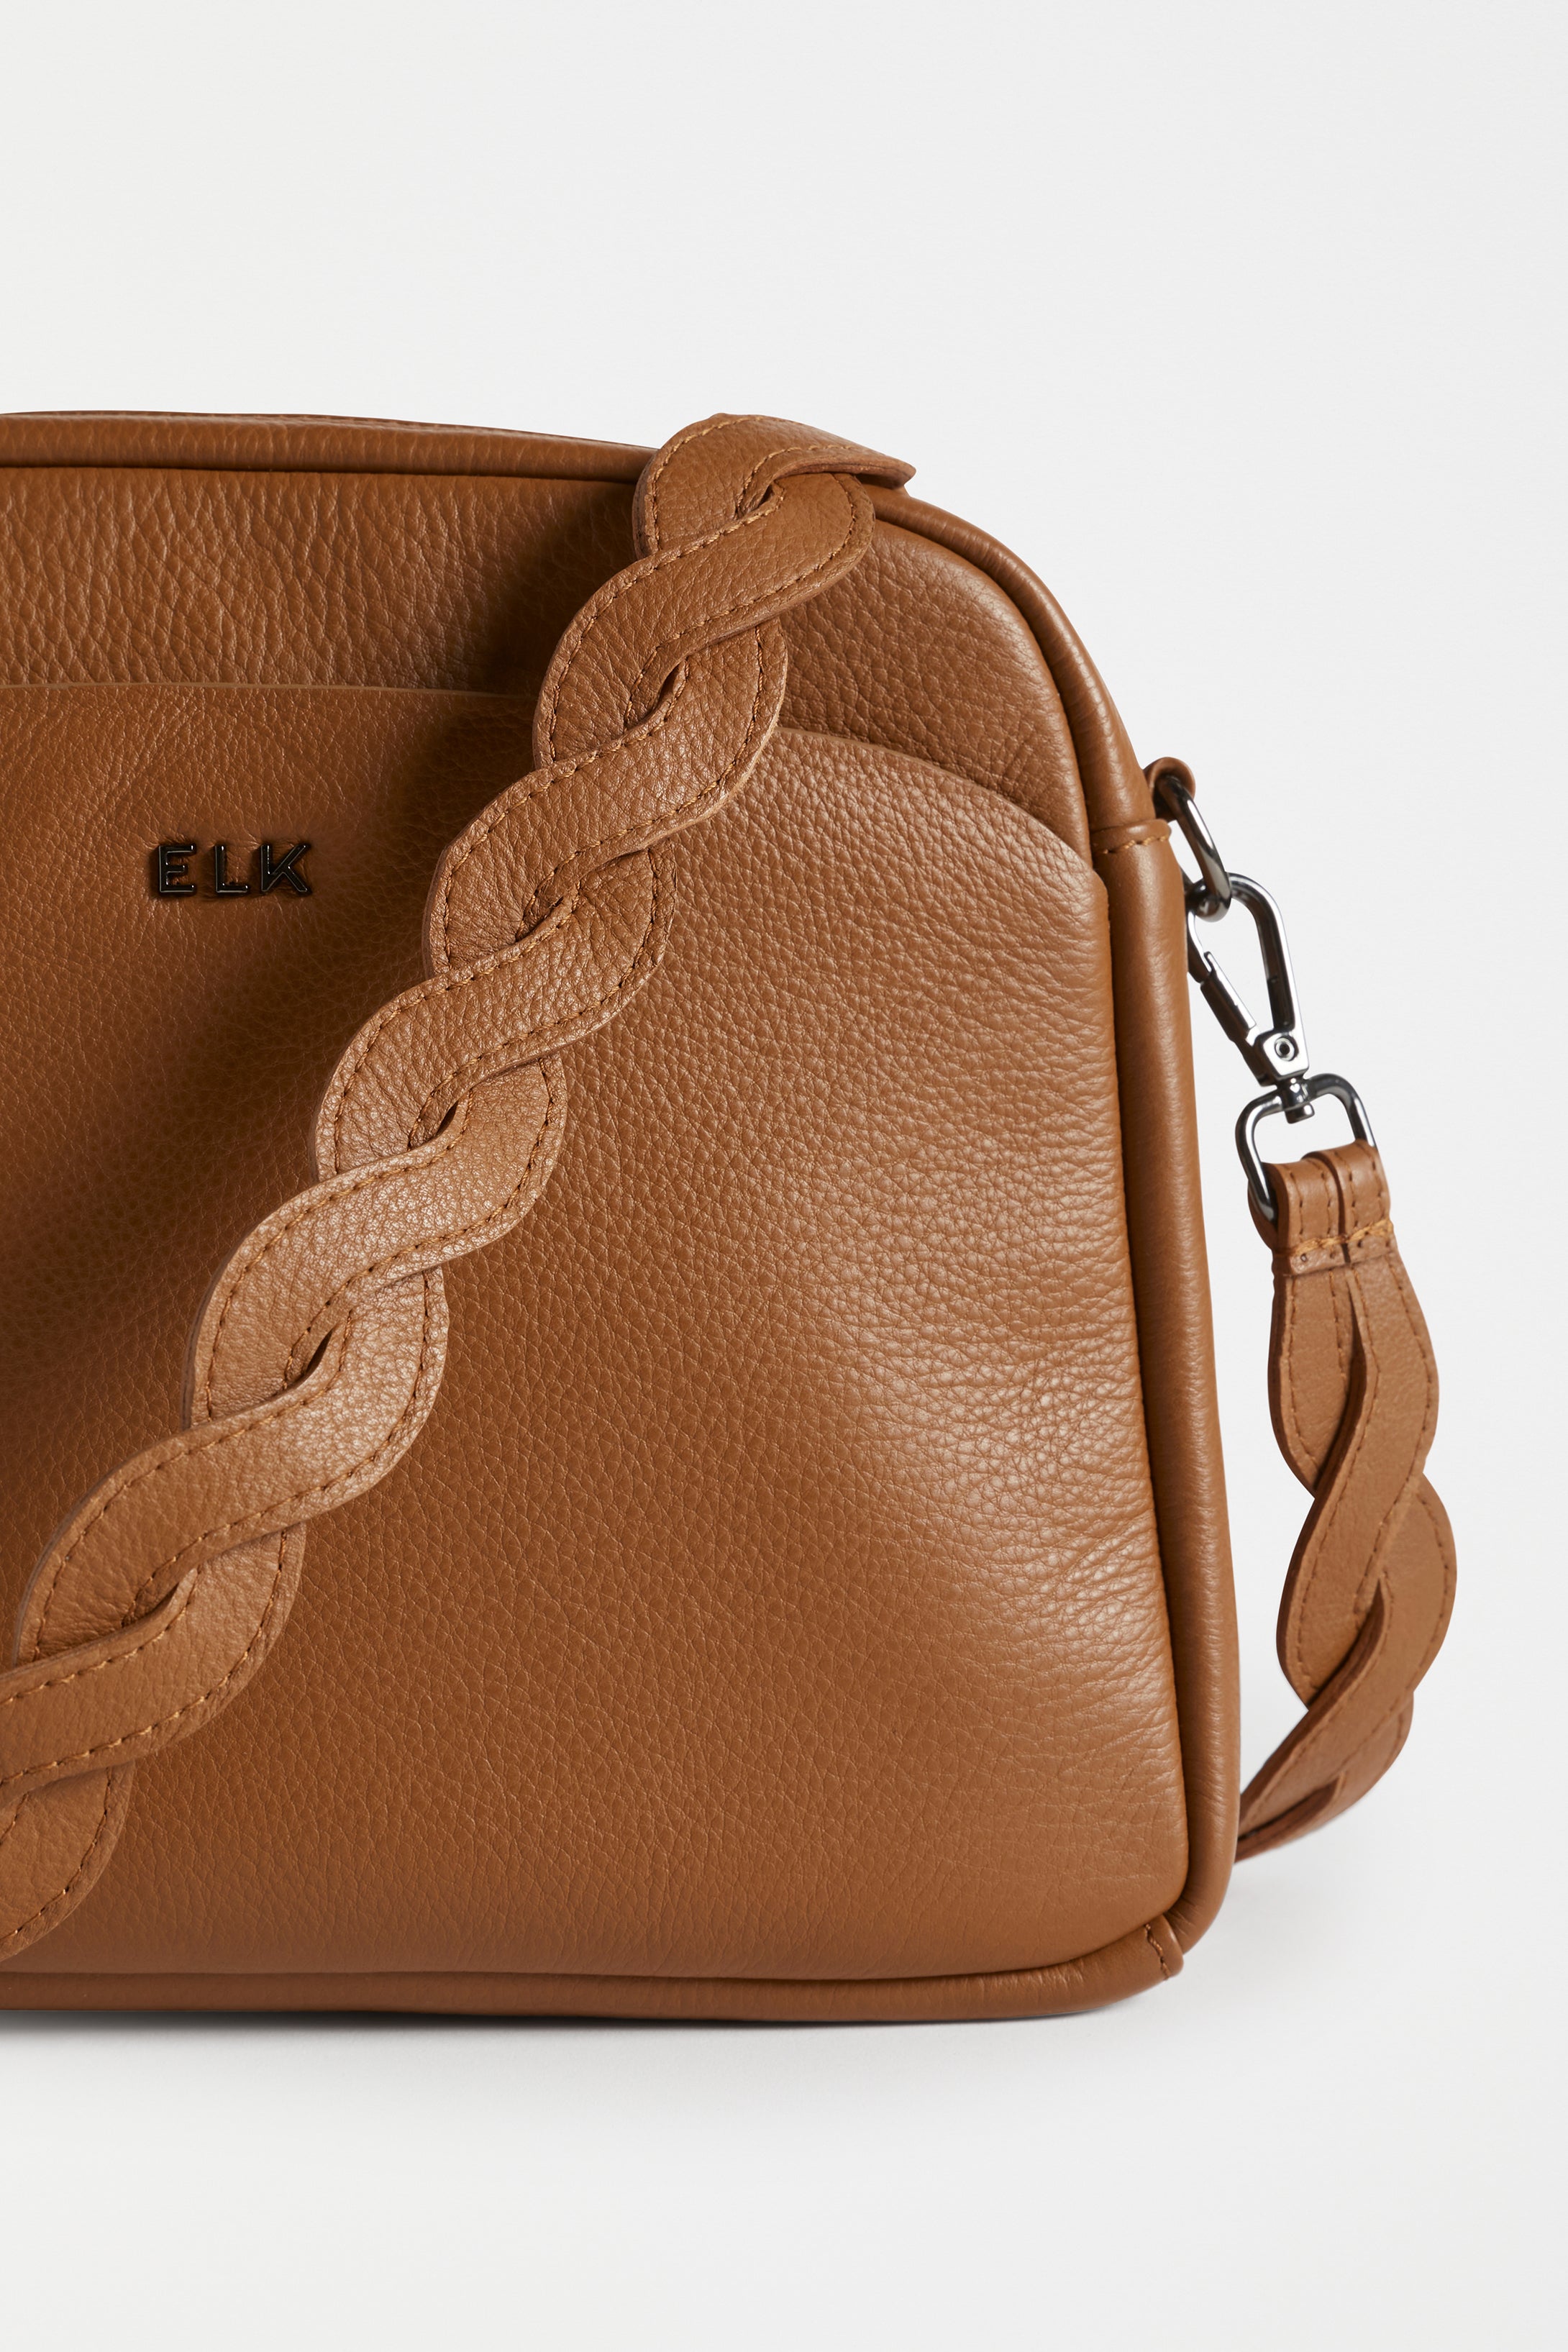 Shop The Arna Medium Sized Leather Cross Body Bag with Braided